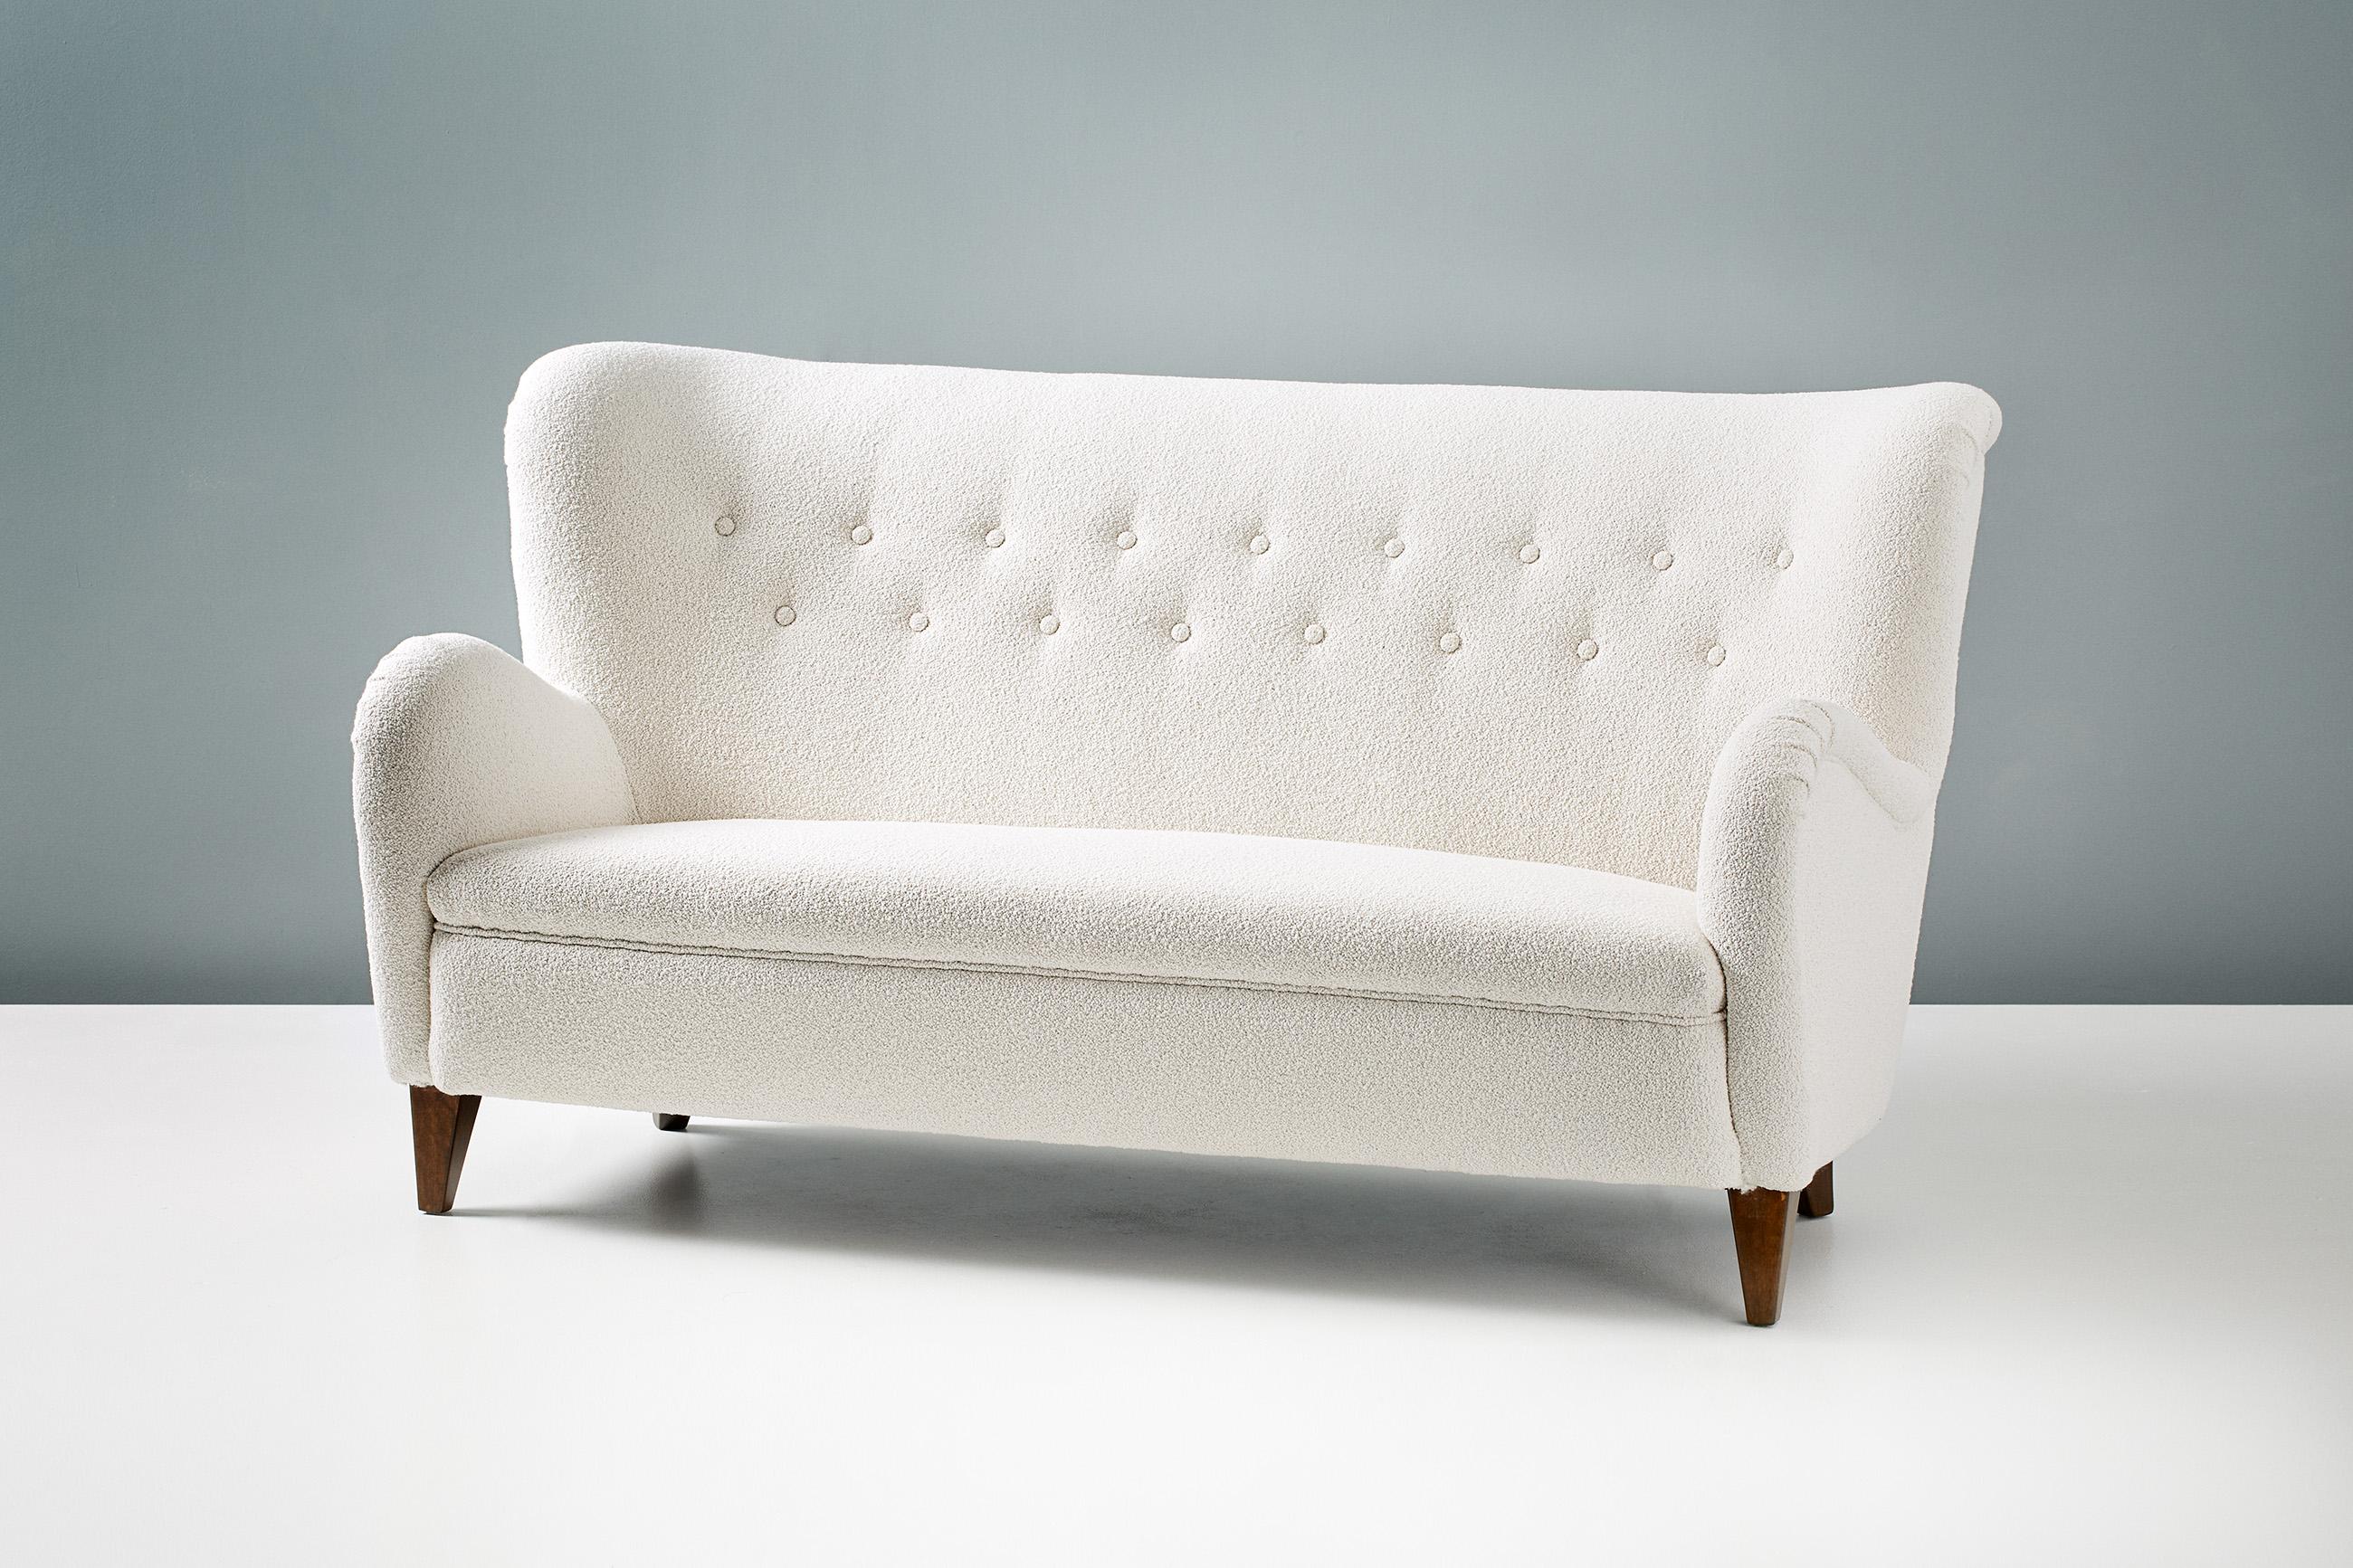 Finnish Cabinetmaker

Curved sofa, 1940s.

Curved sofa produced in Finland in the 1940s. The sofa has carved, stained elm wood legs and has been reupholstered in a luxurious cotton-wool blend, bouclé fabric from Chase Erwin in the UK. The sofa